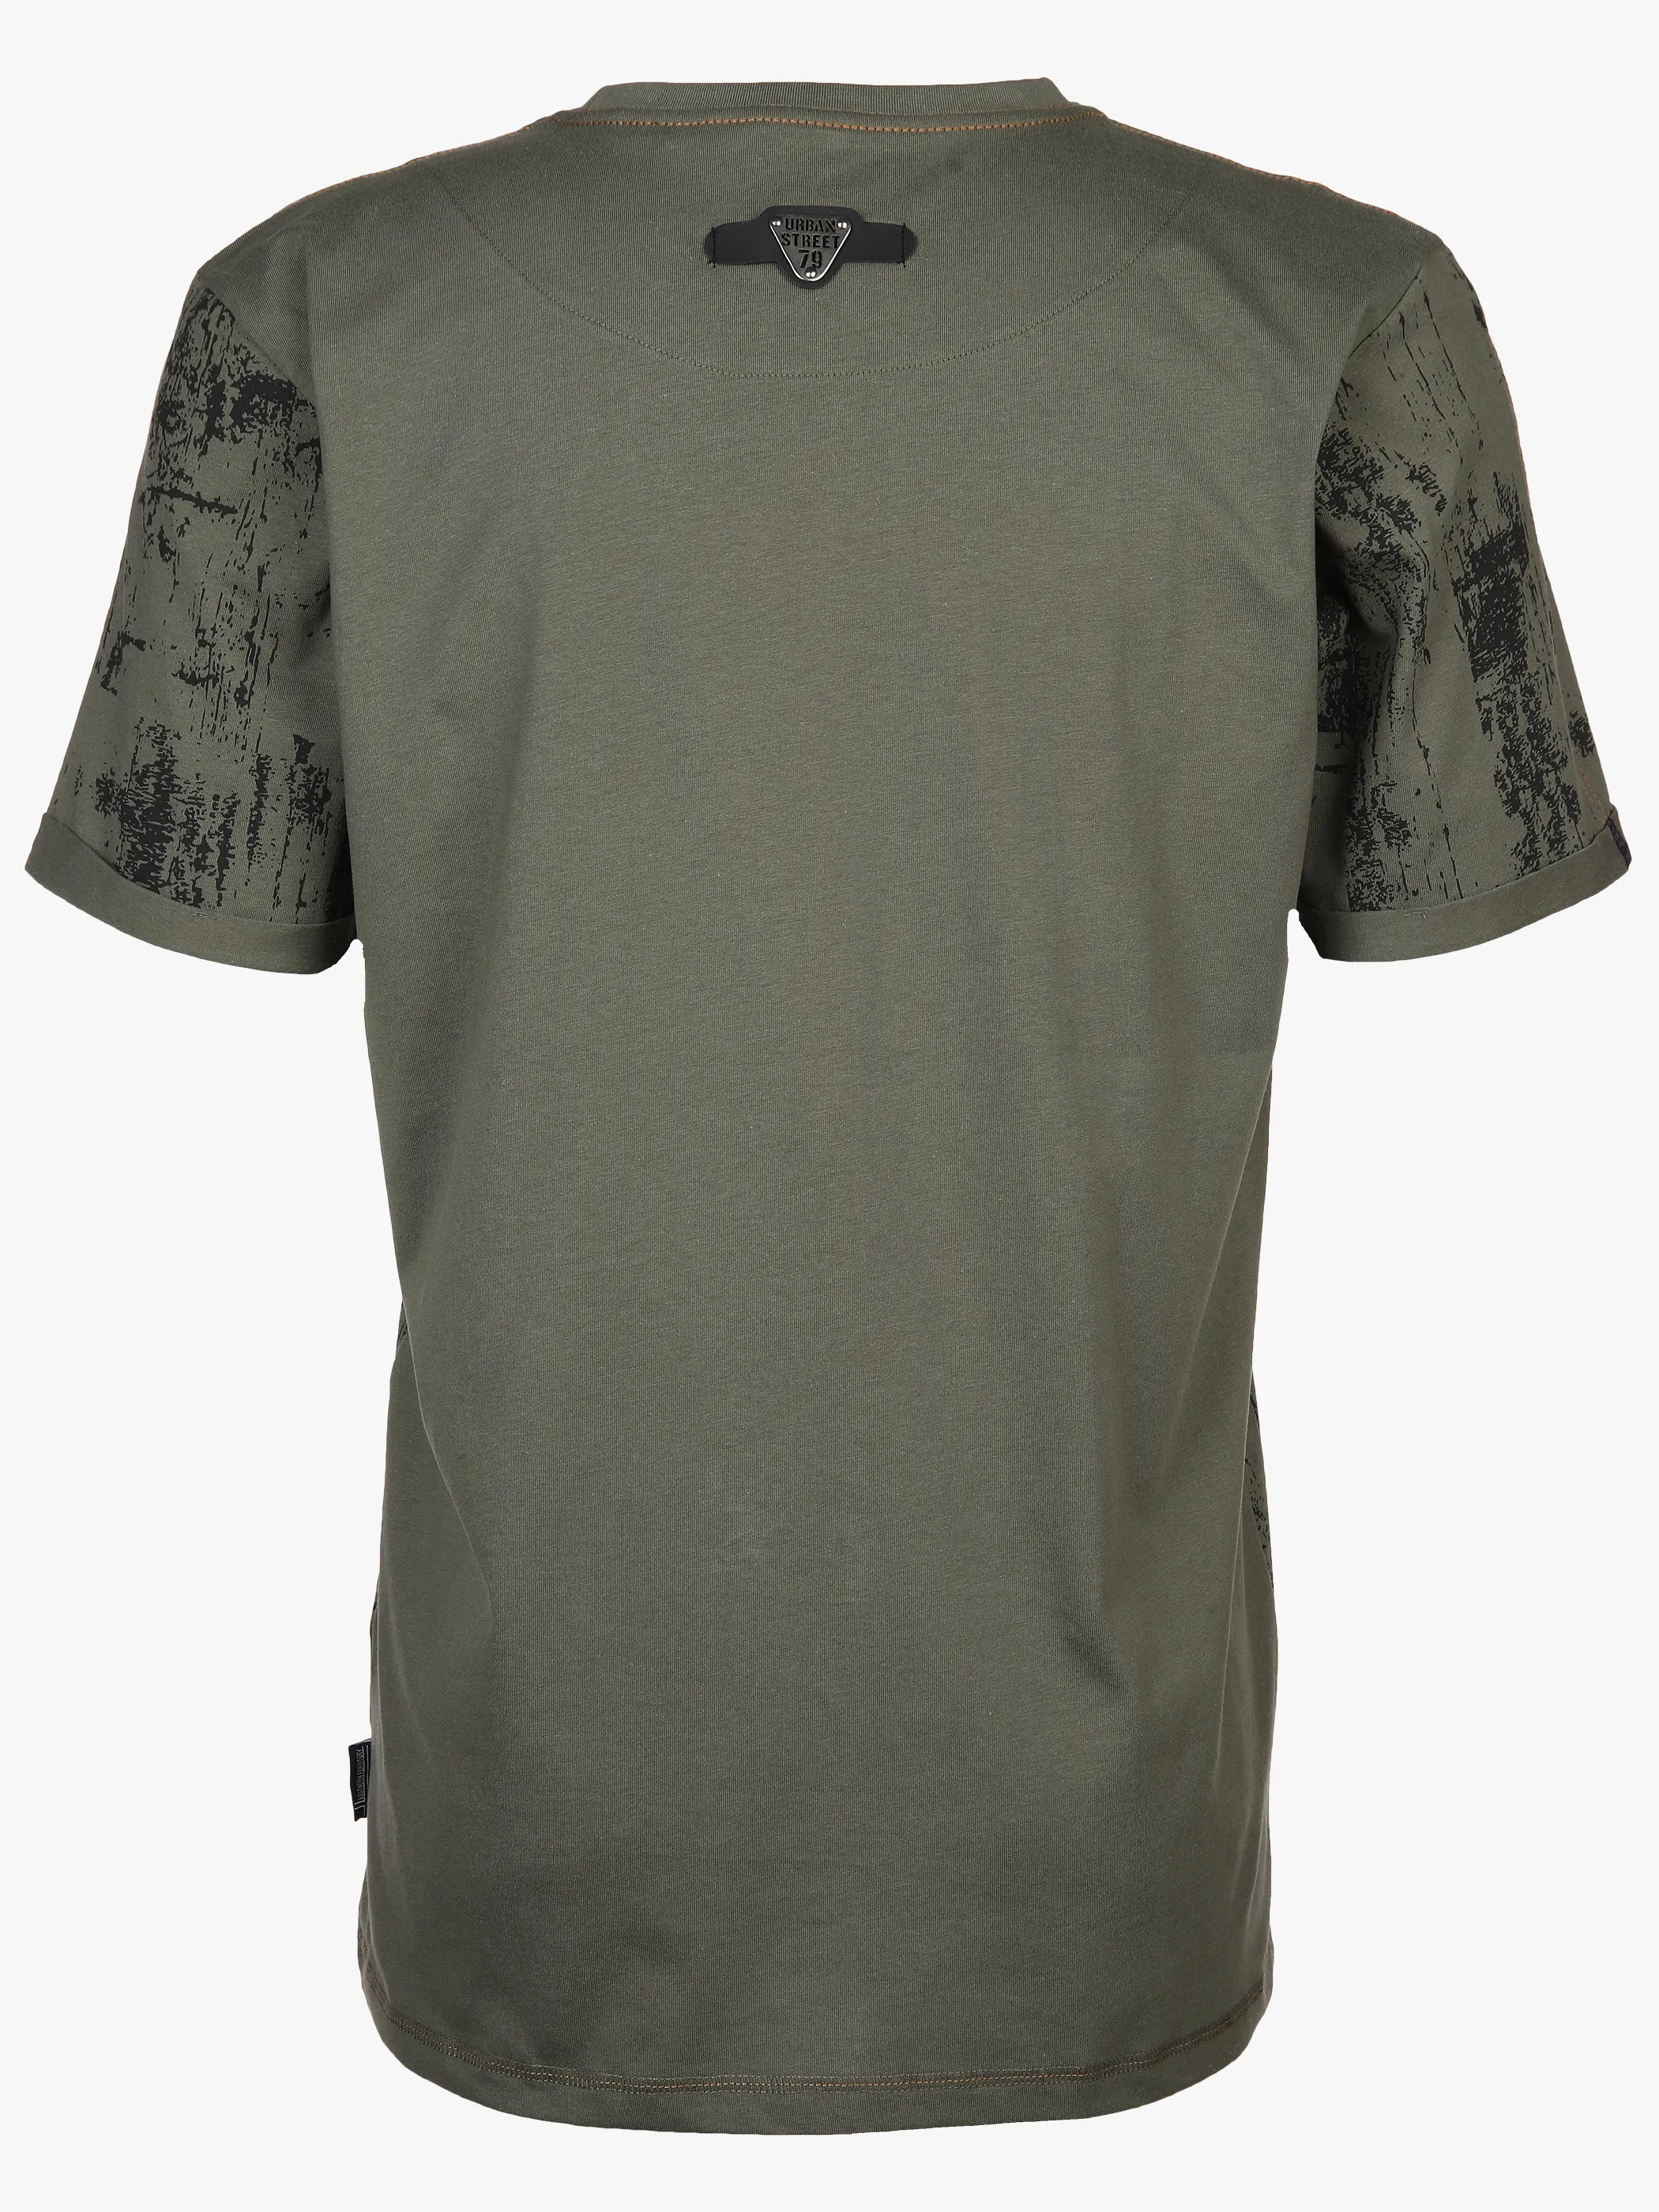 Southern Territory He- T-Shirt 1/2 Arm allover Oliv 893221 OLIVE 2